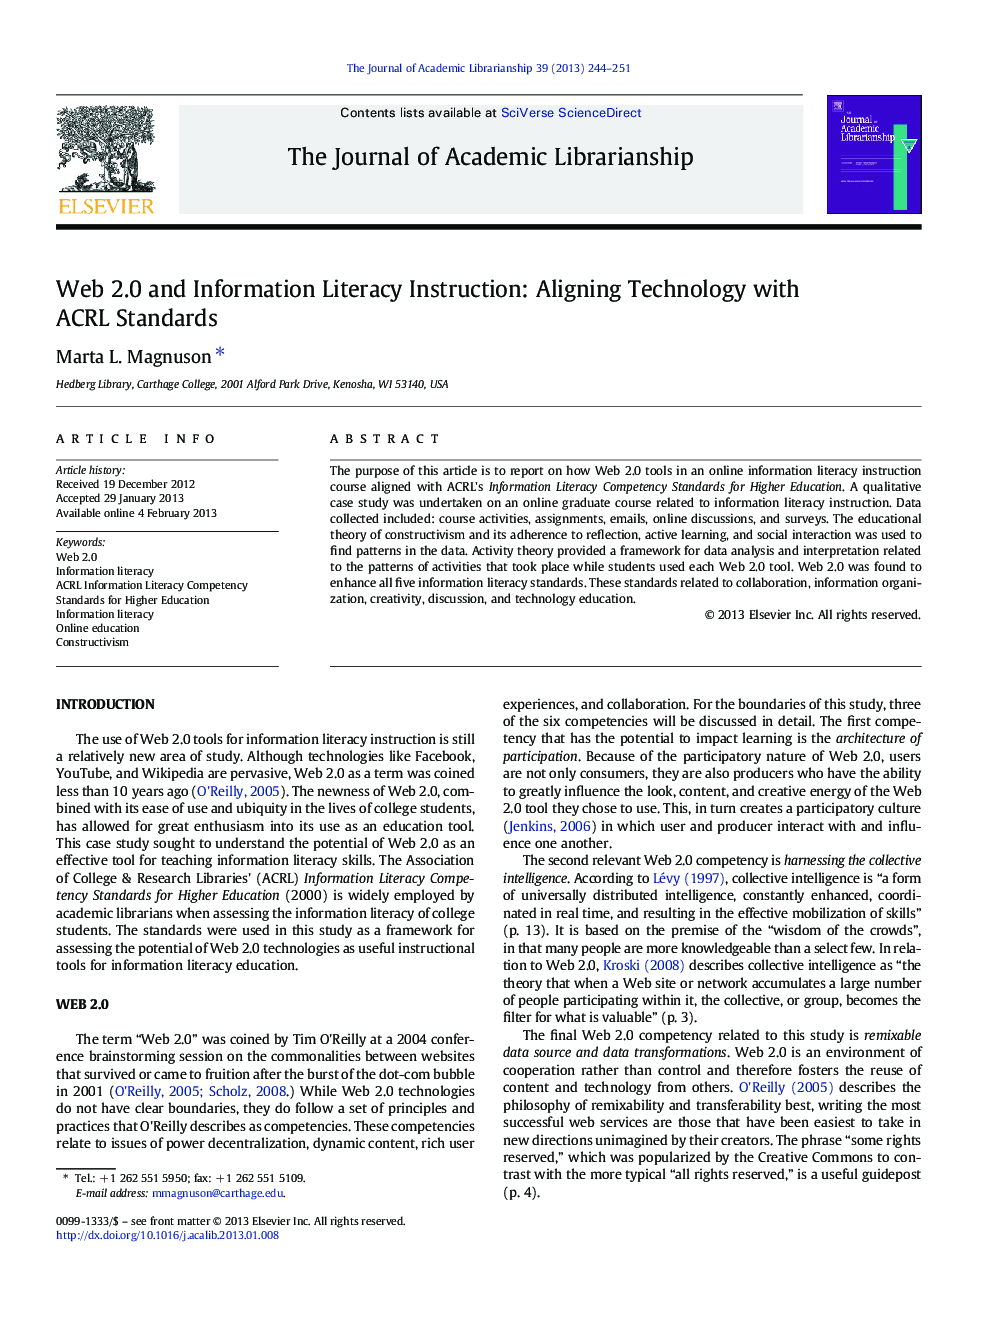 Web 2.0 and Information Literacy Instruction: Aligning Technology with ACRL Standards